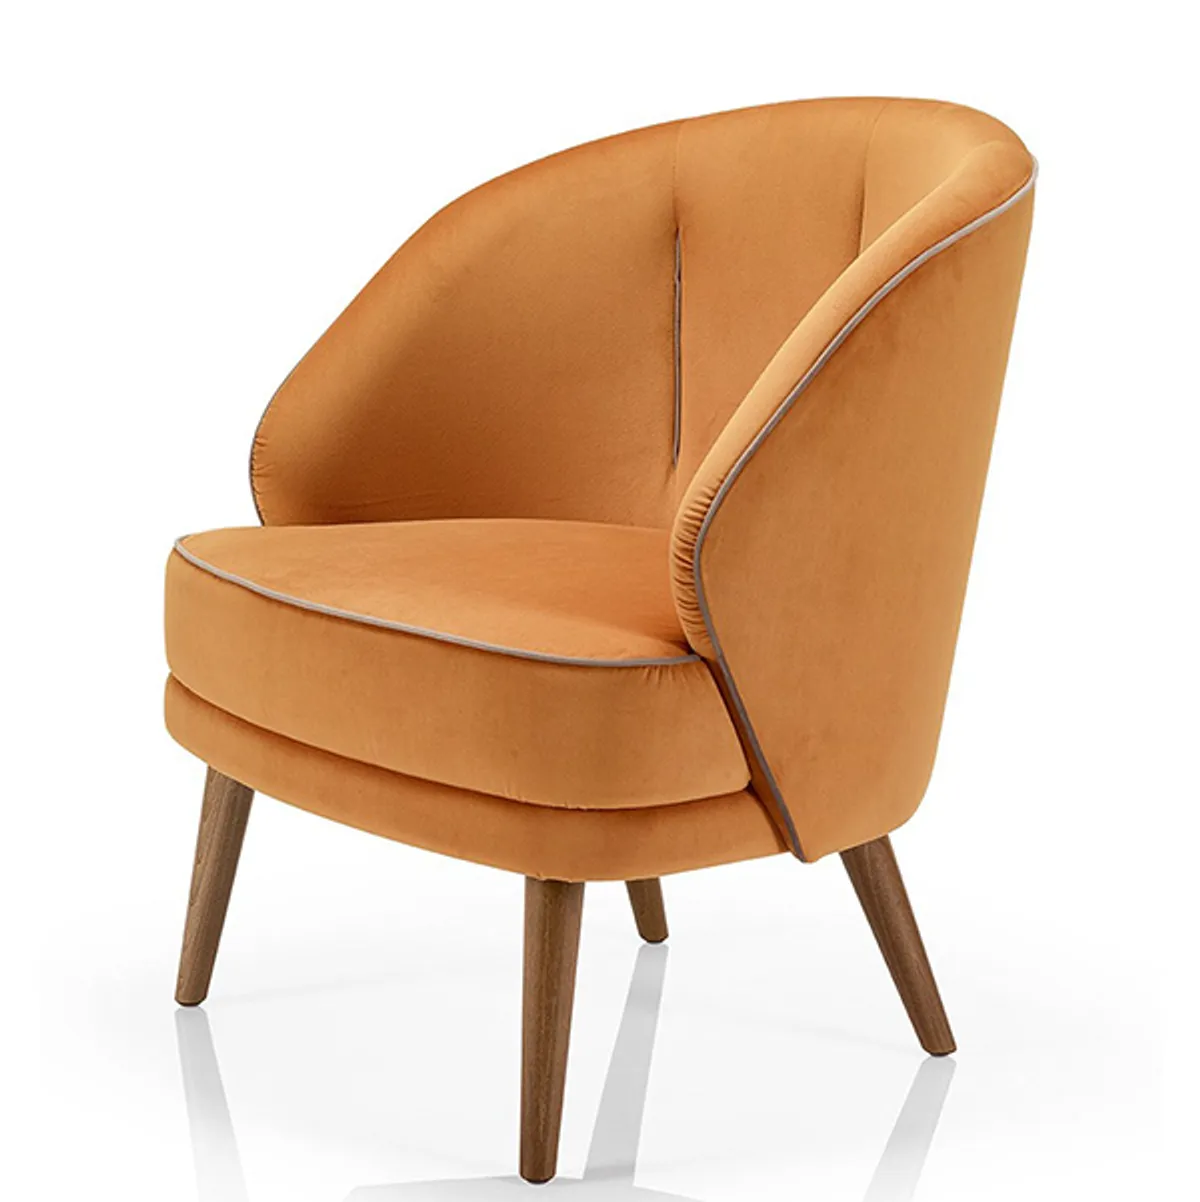 Lissy Lounge Chair With Orange Upholstery And Piping